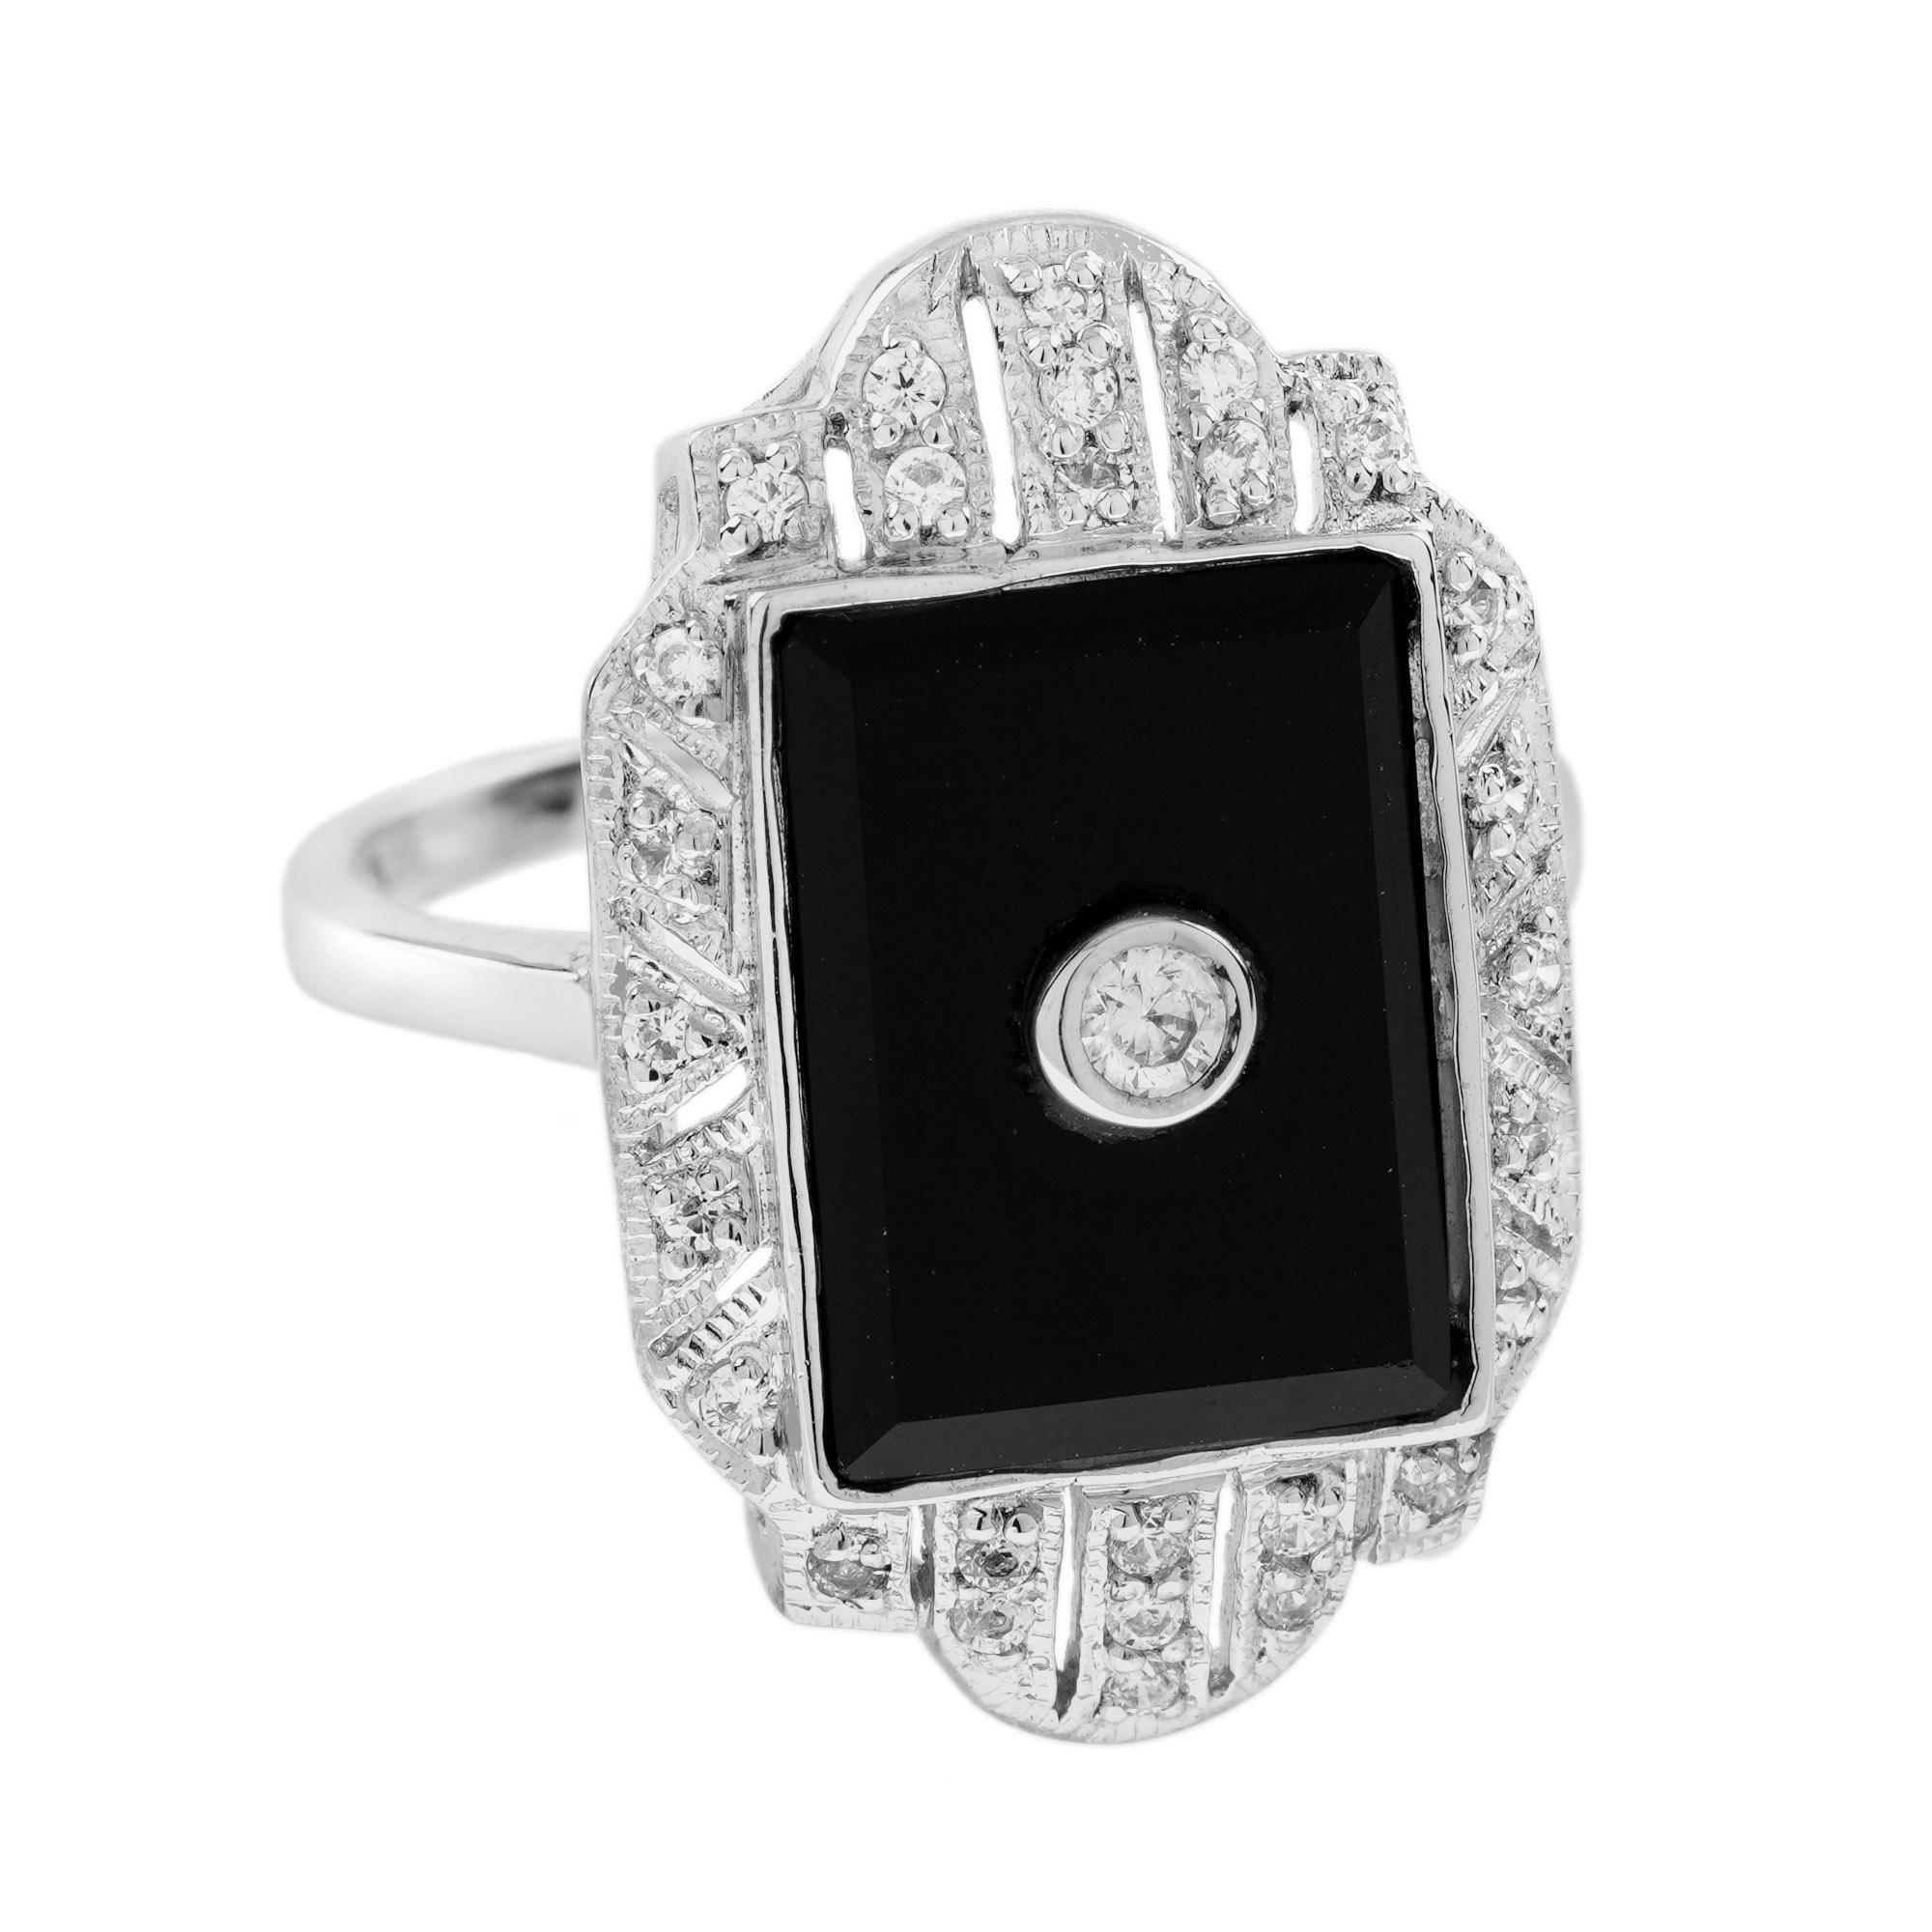 For Sale:  Diamond and Onyx Art Deco Style Dinner Ring in 14K White Gold 3